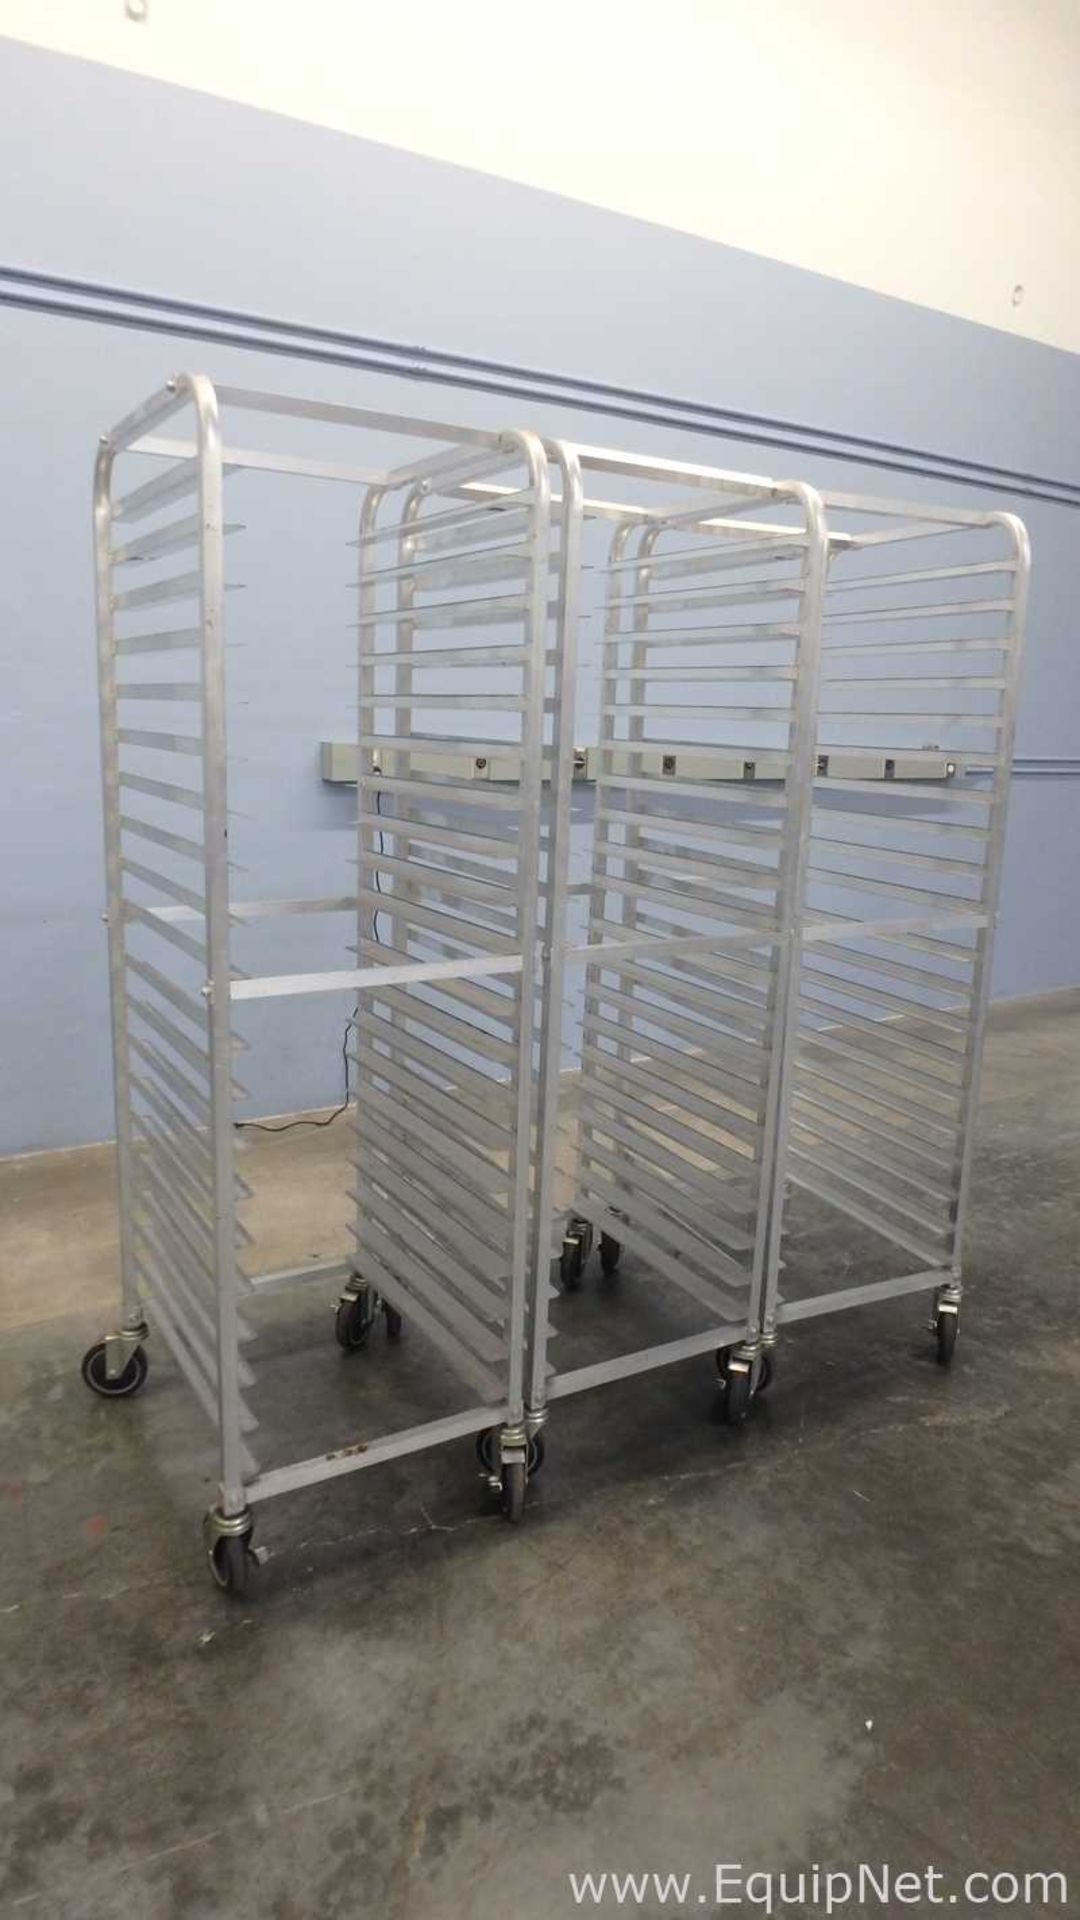 Lot of 3 Atlanta Culinary Equipment Mobile Pan Rack Full Ht. Open Sides with 20 18inx26in Slide Pans - Image 3 of 8